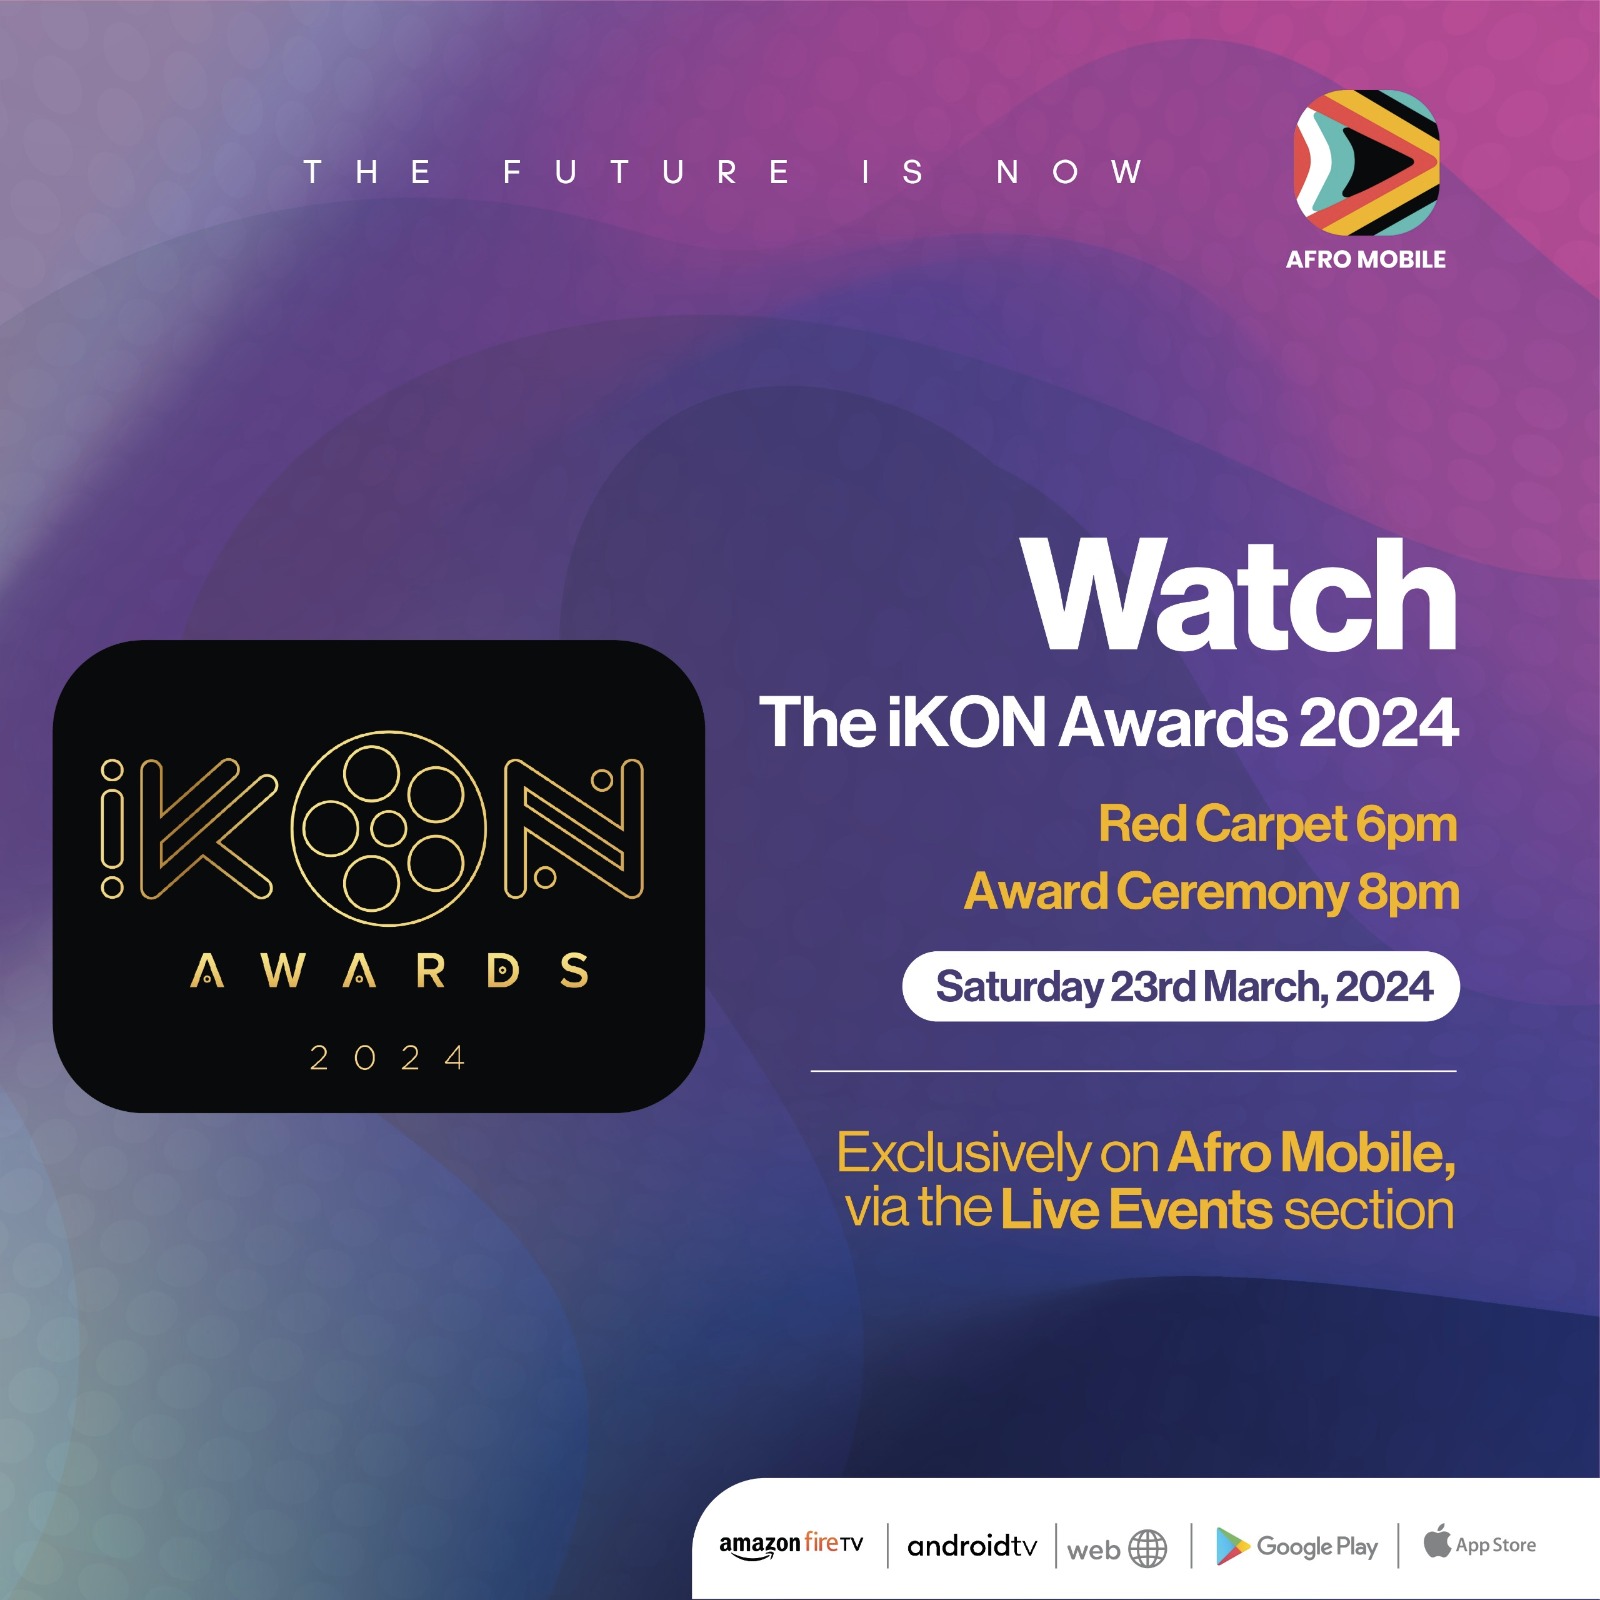 Afro Mobile to stream live iKON Awards